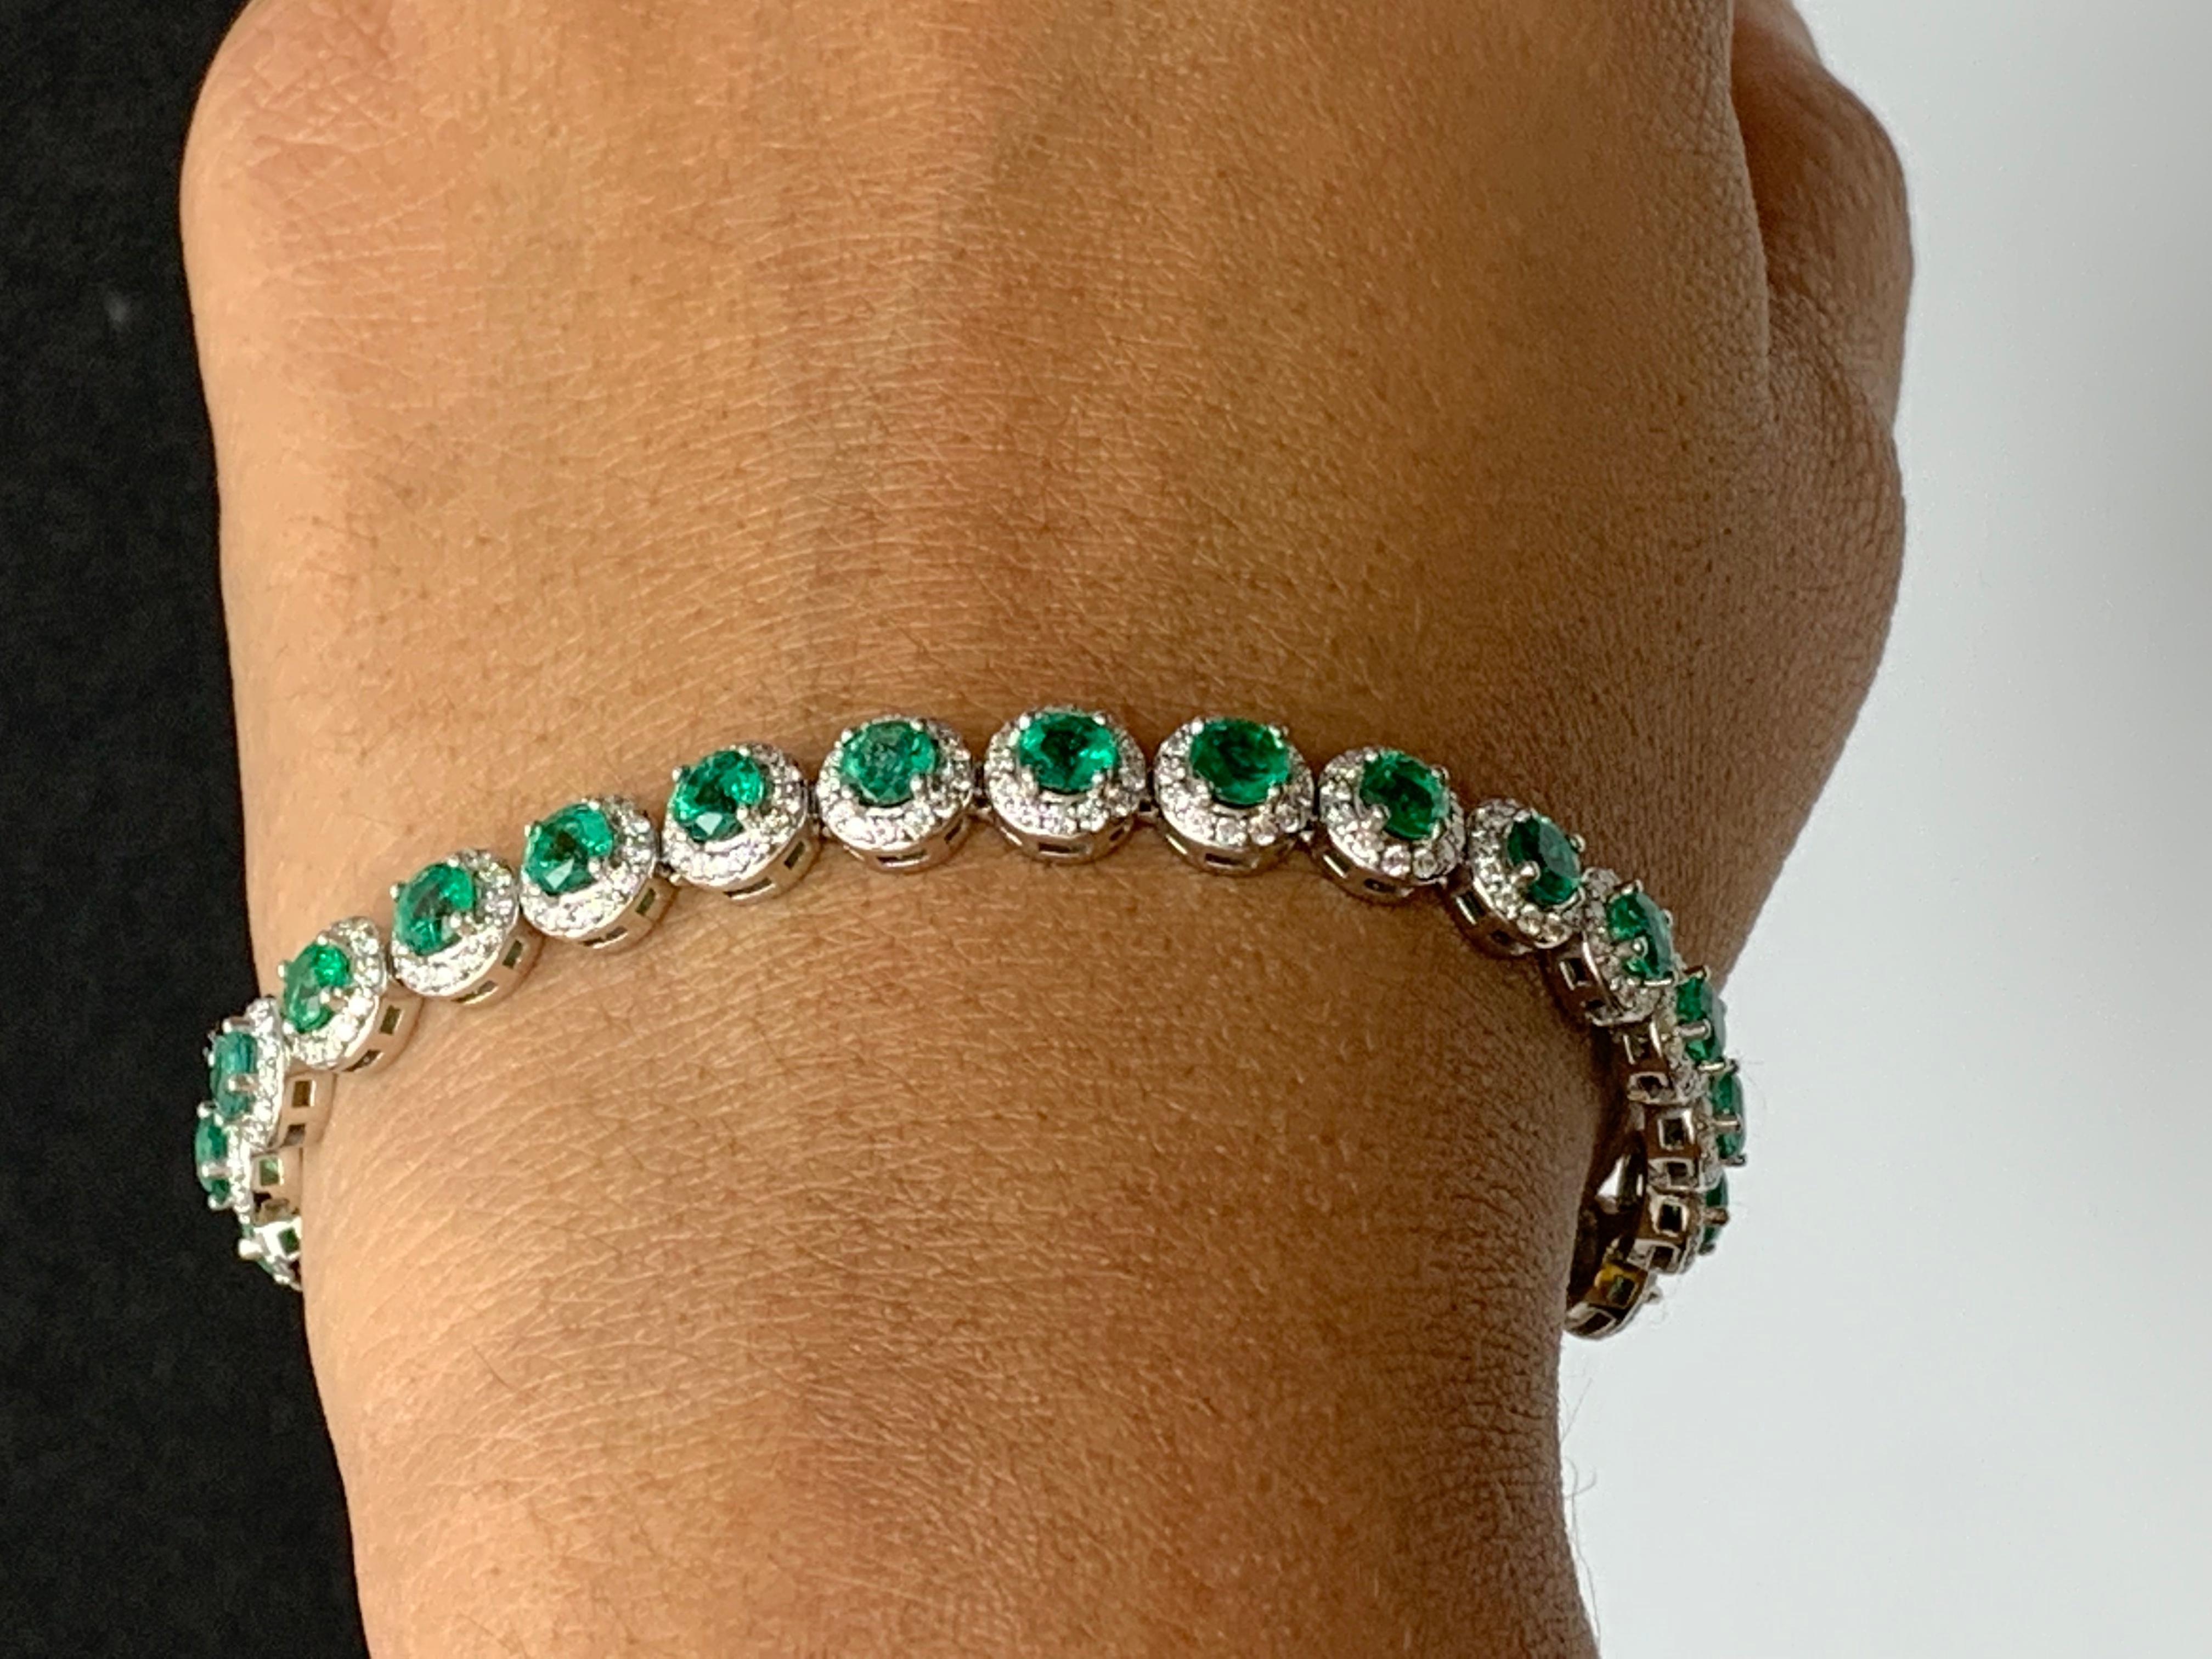 6.94 Carat Emerald and Diamond Halo Tennis Bracelet in 14k White Gold For Sale 8